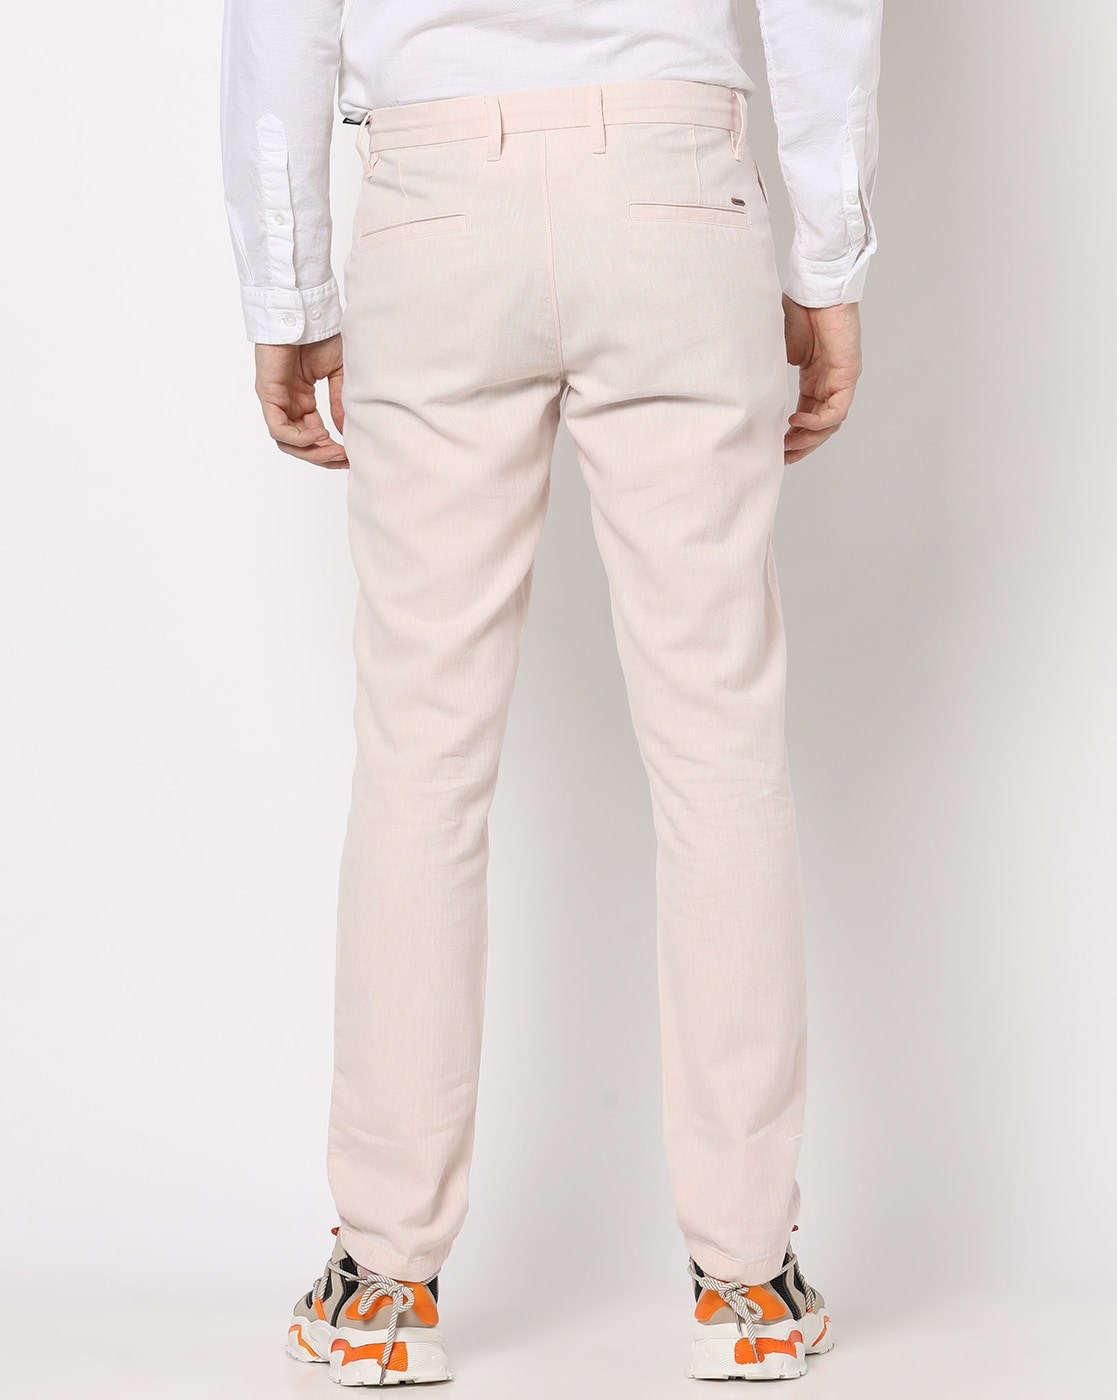 Size 36 John Players Mens Slim Fit Casual Trousers Offer on Amazon India  Price Rs 559  INRDeals